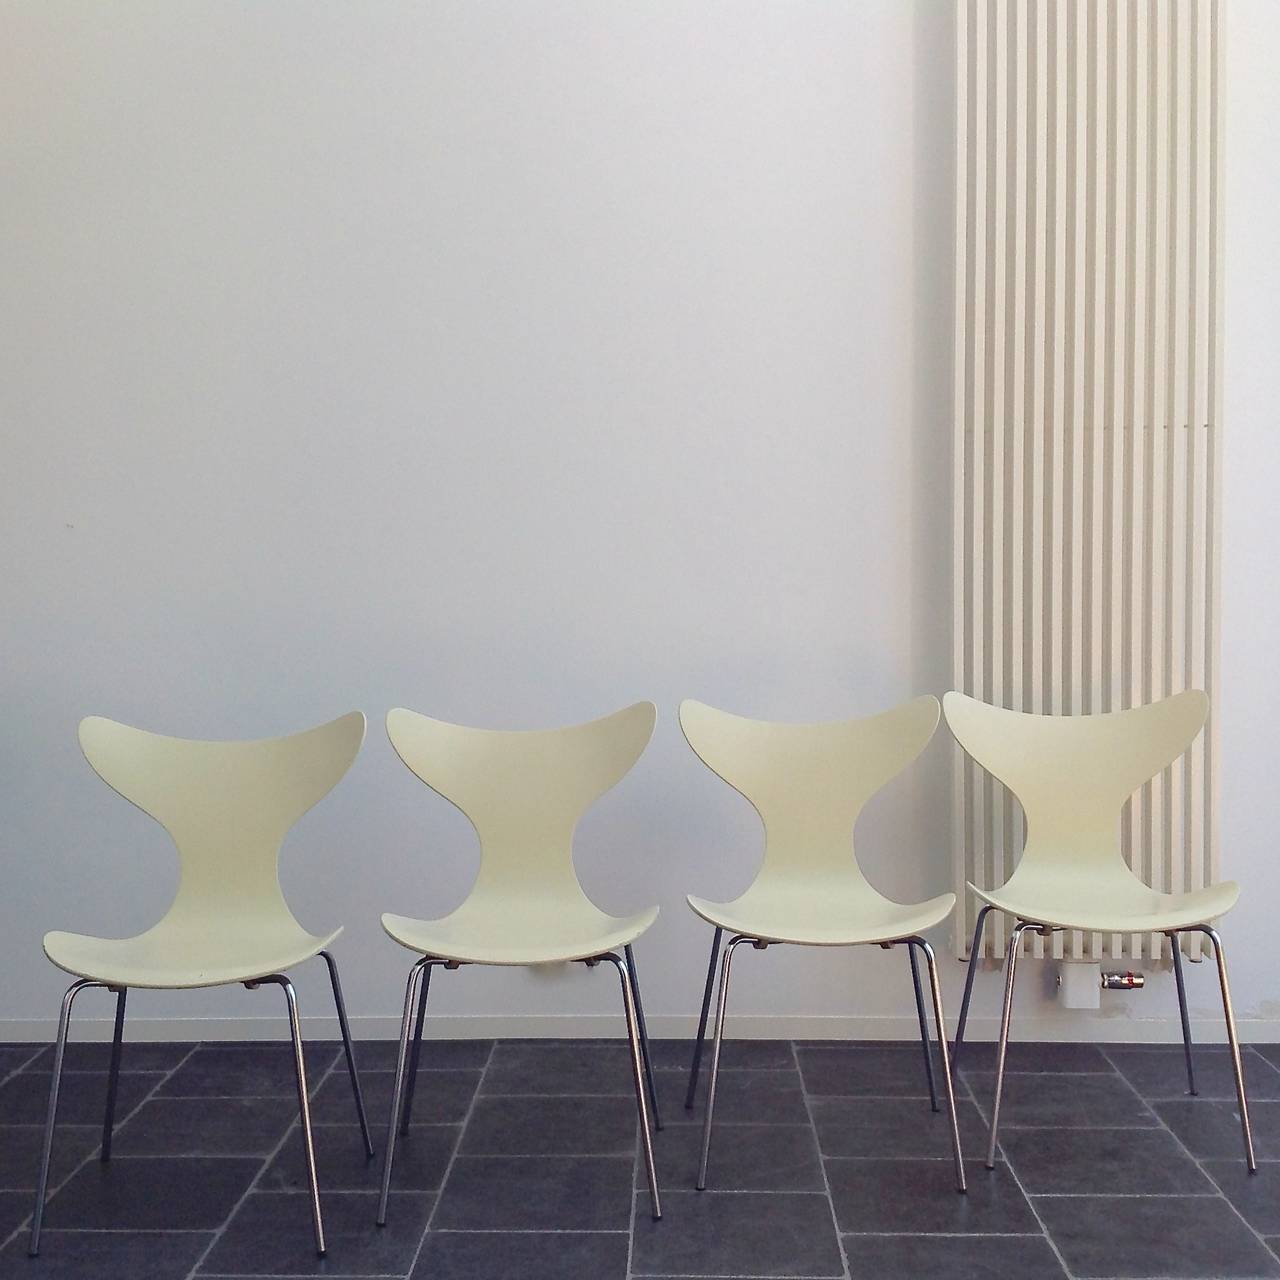 Lacquered Set of 4 Seagull Chairs by Arne Jacobsen for Fritz Hansen, in original condition